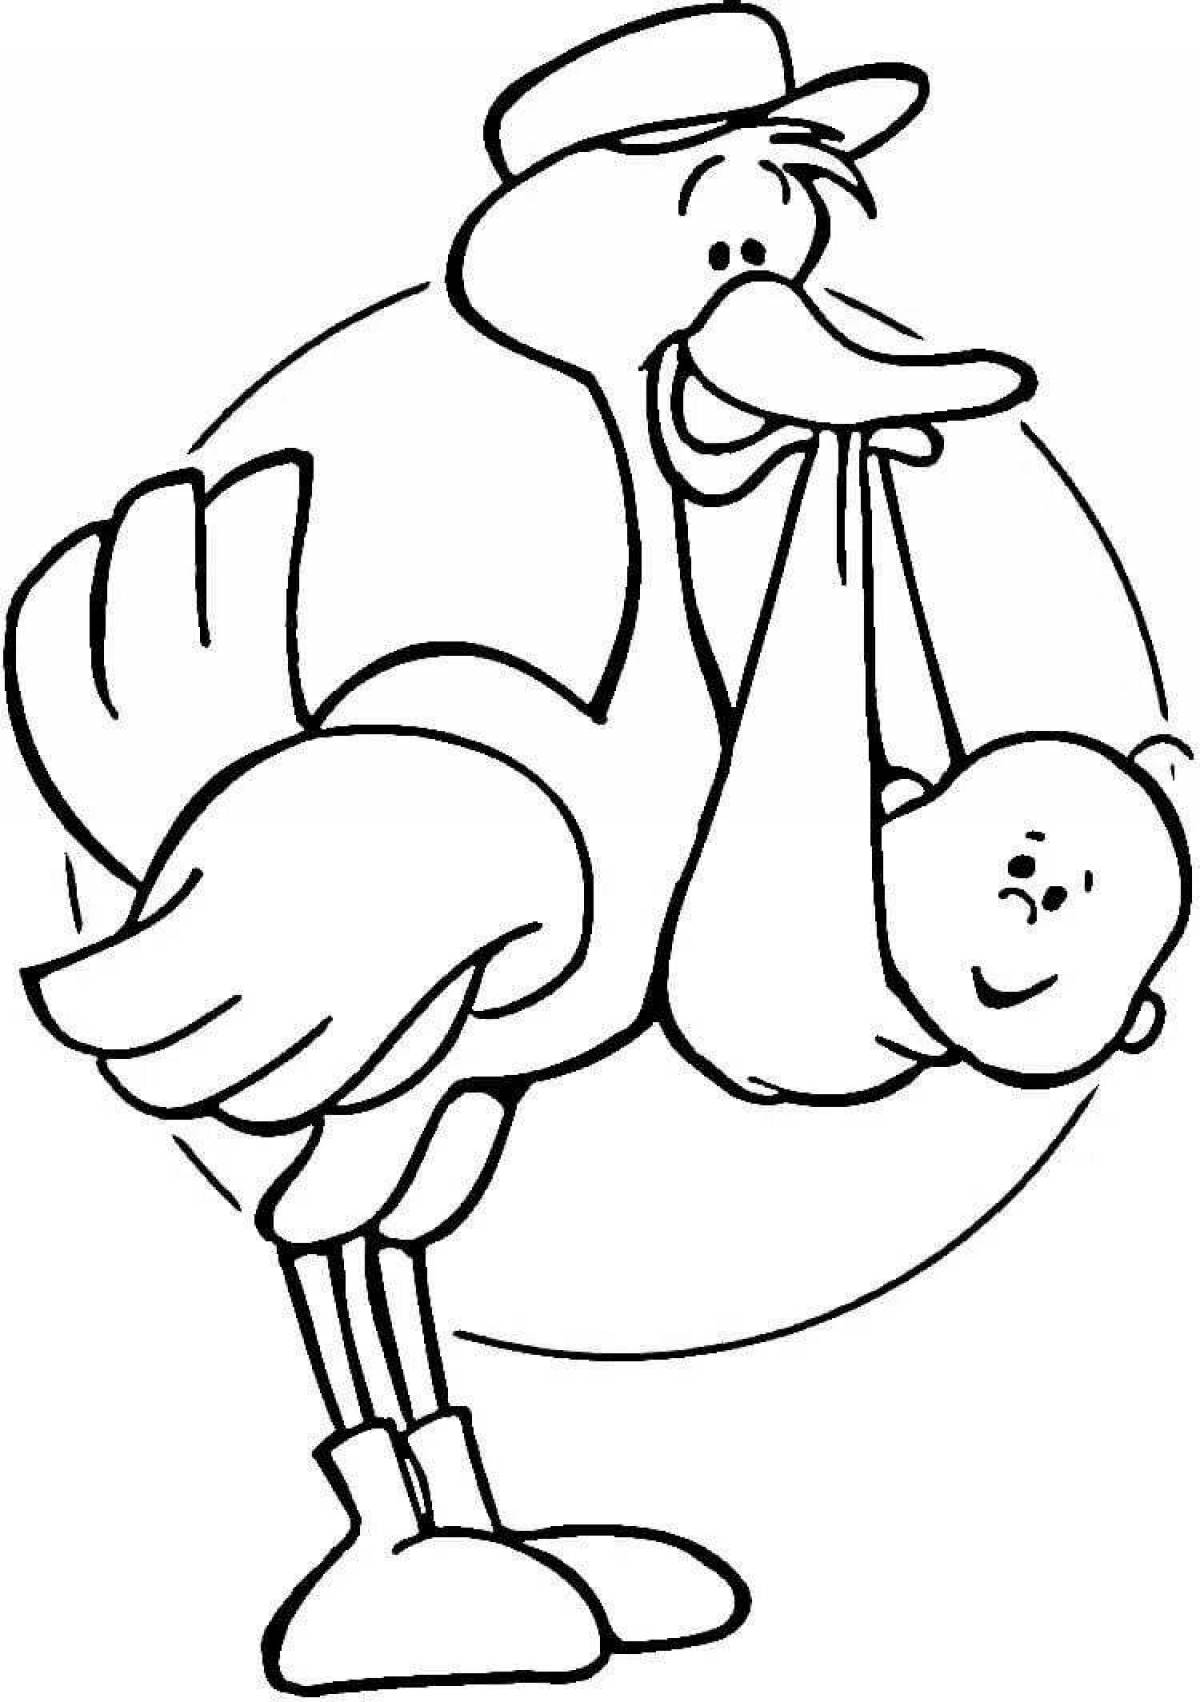 Coloring book cheerful stork with baby